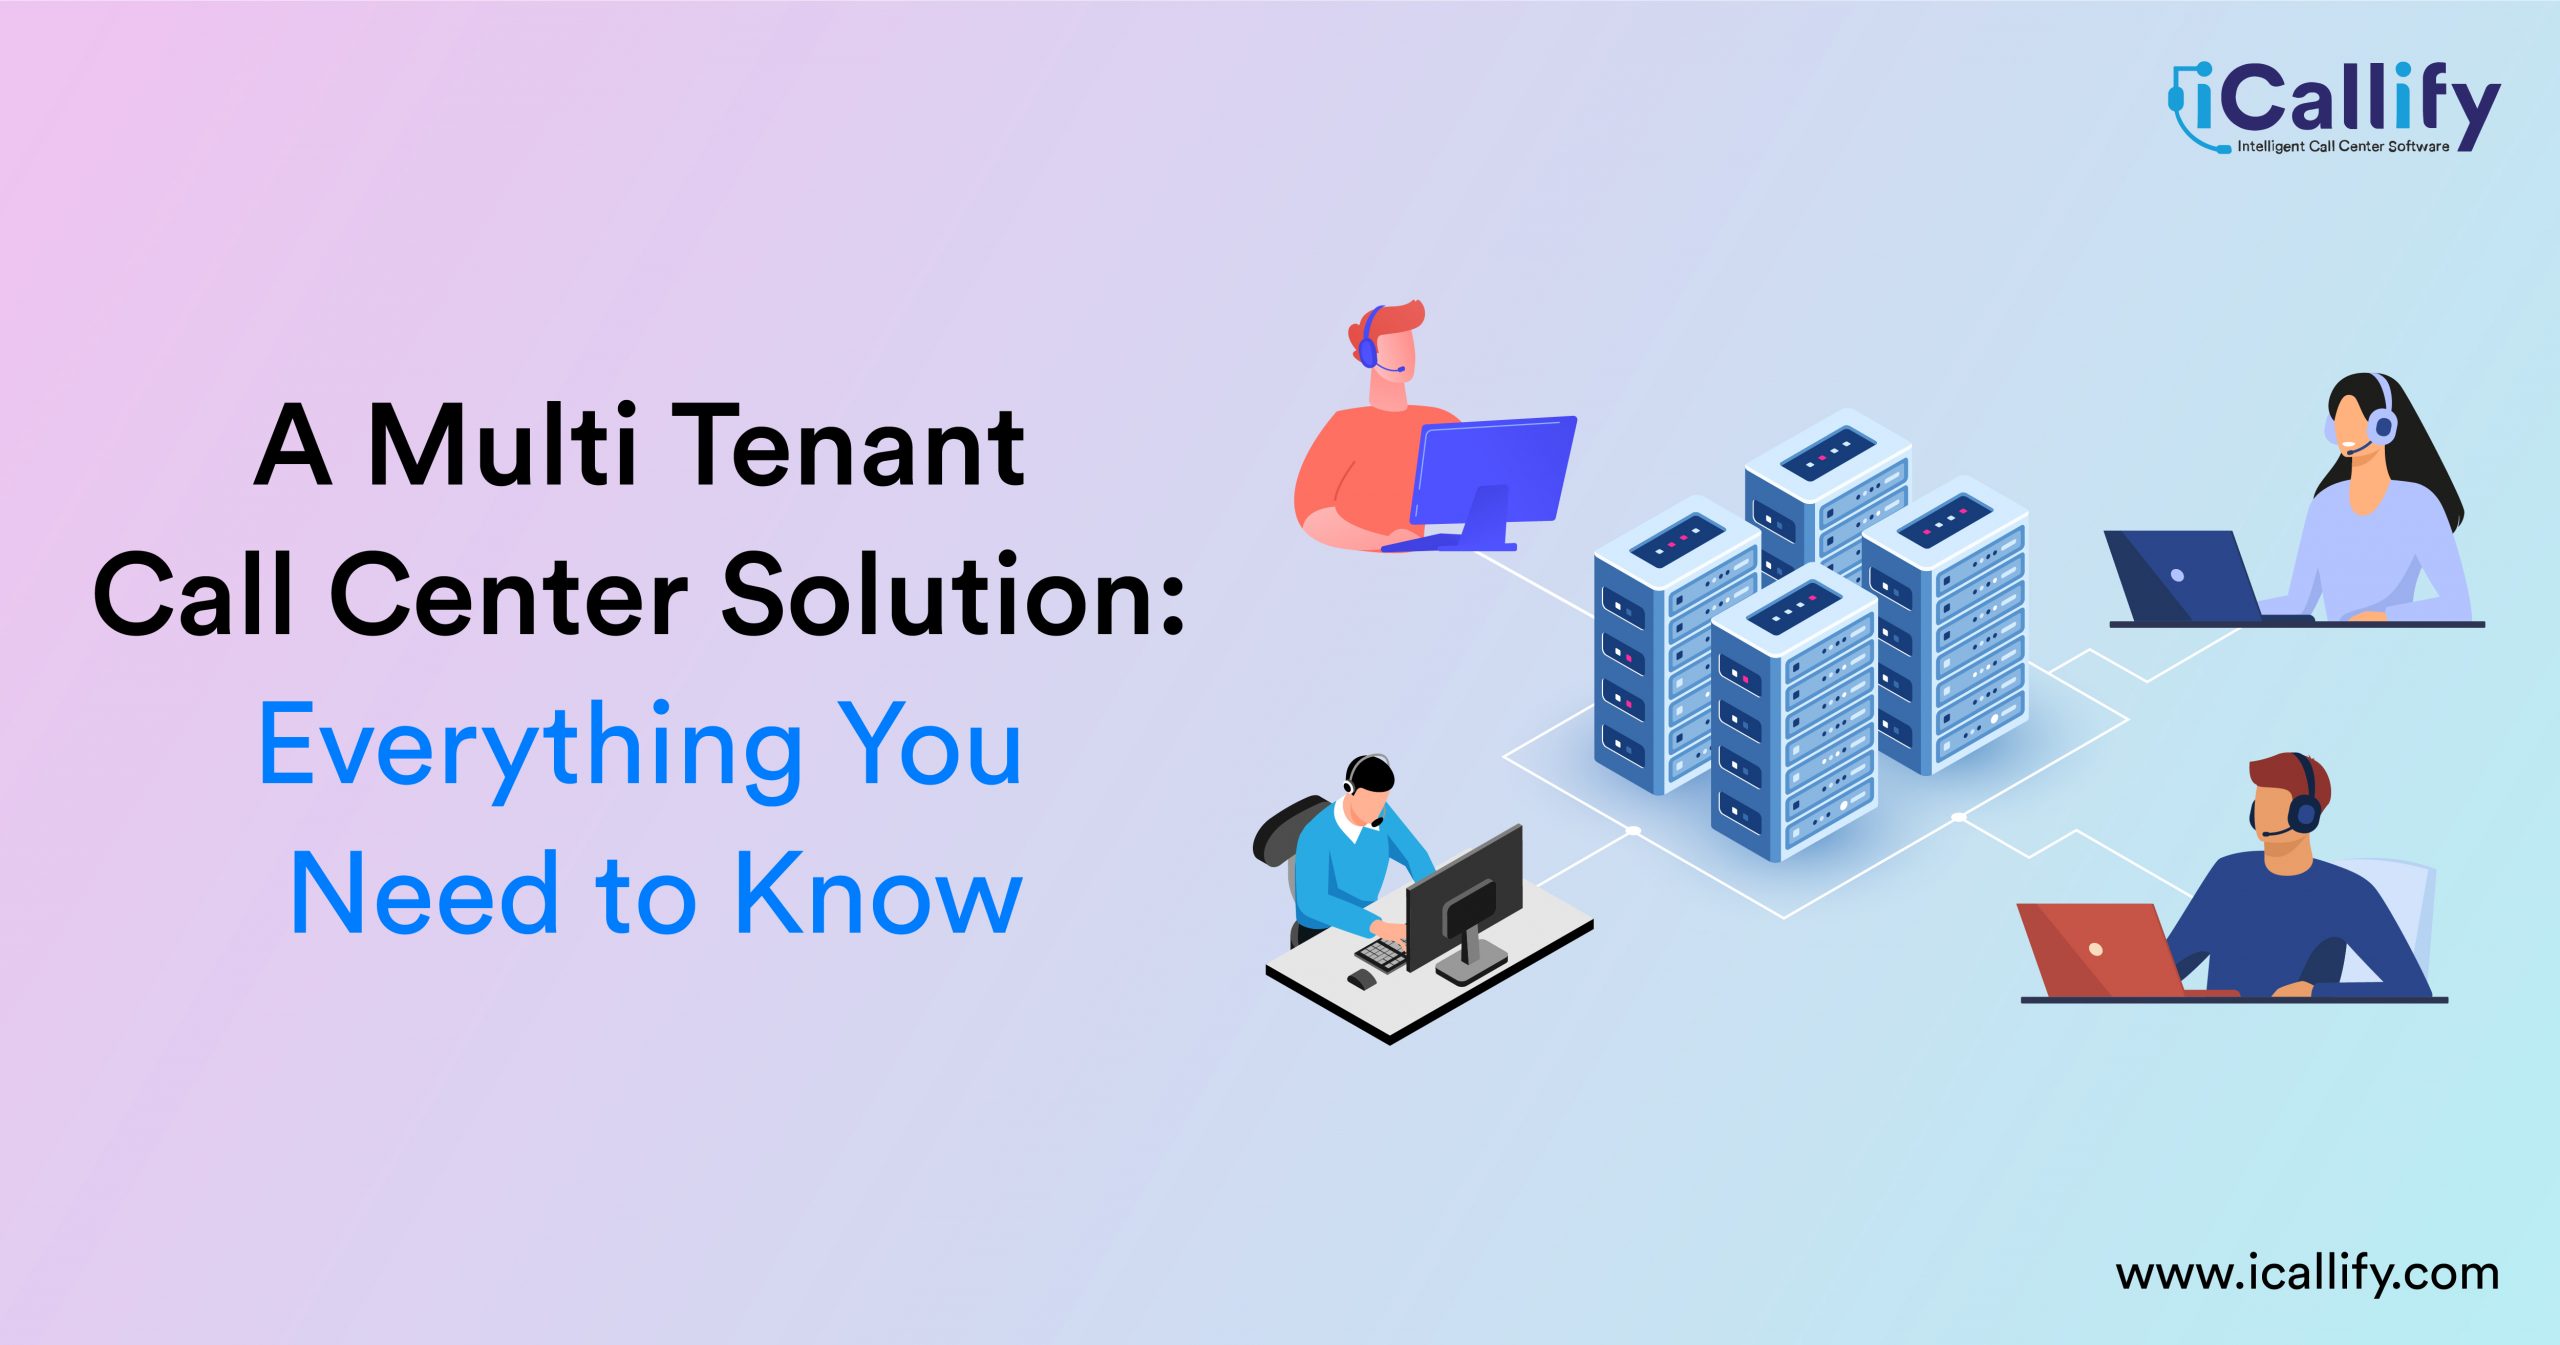 A Multi Tenant Call Center Solution: Everything You Need to Know